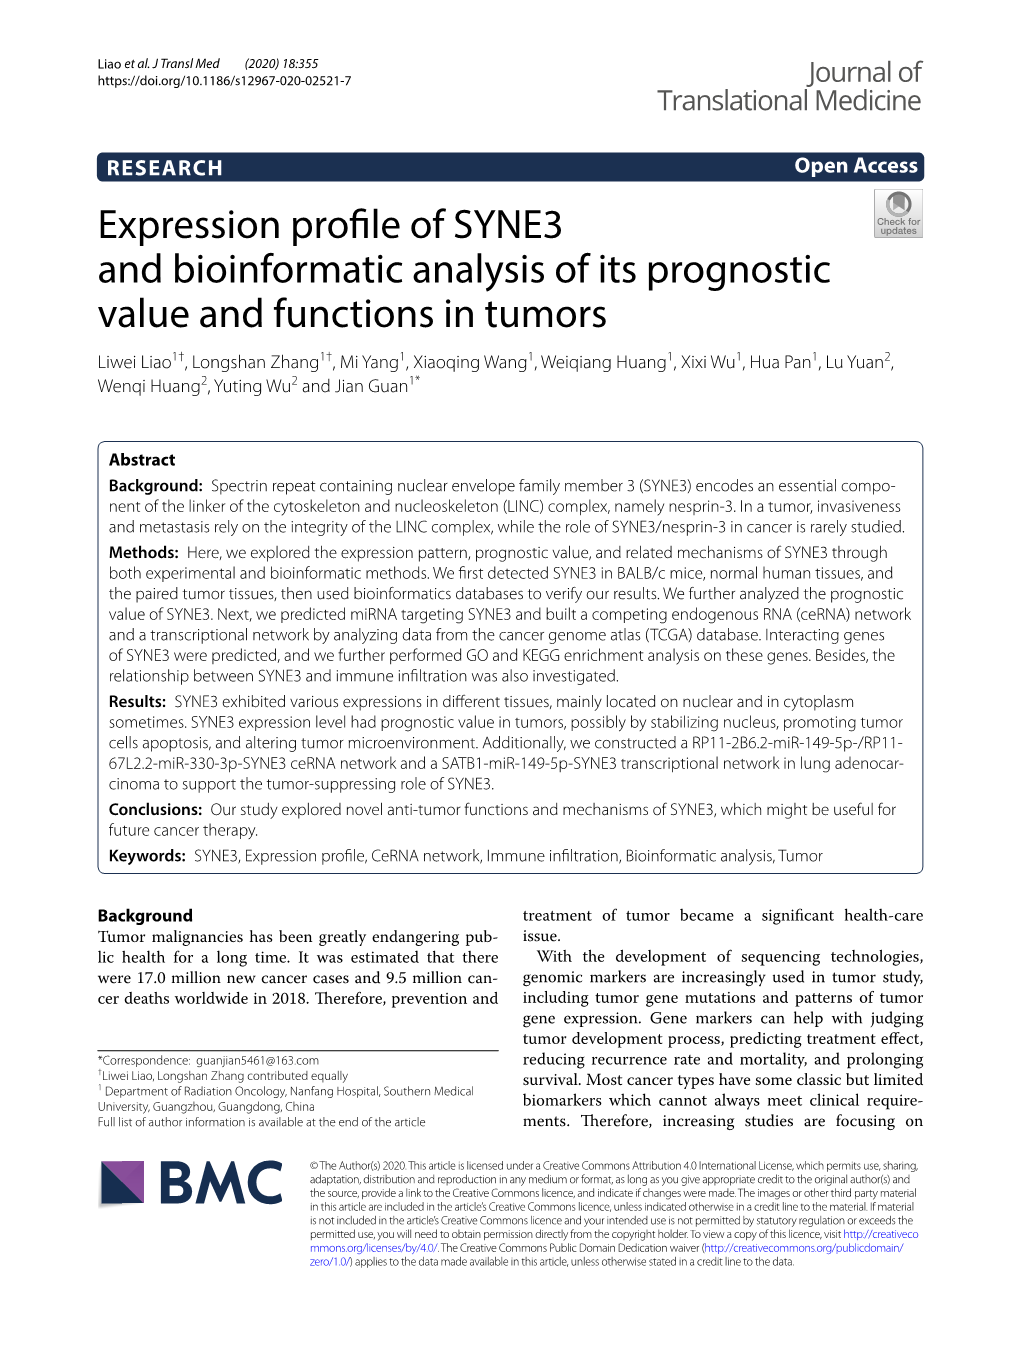 Expression Profile of SYNE3 and Bioinformatic Analysis of Its